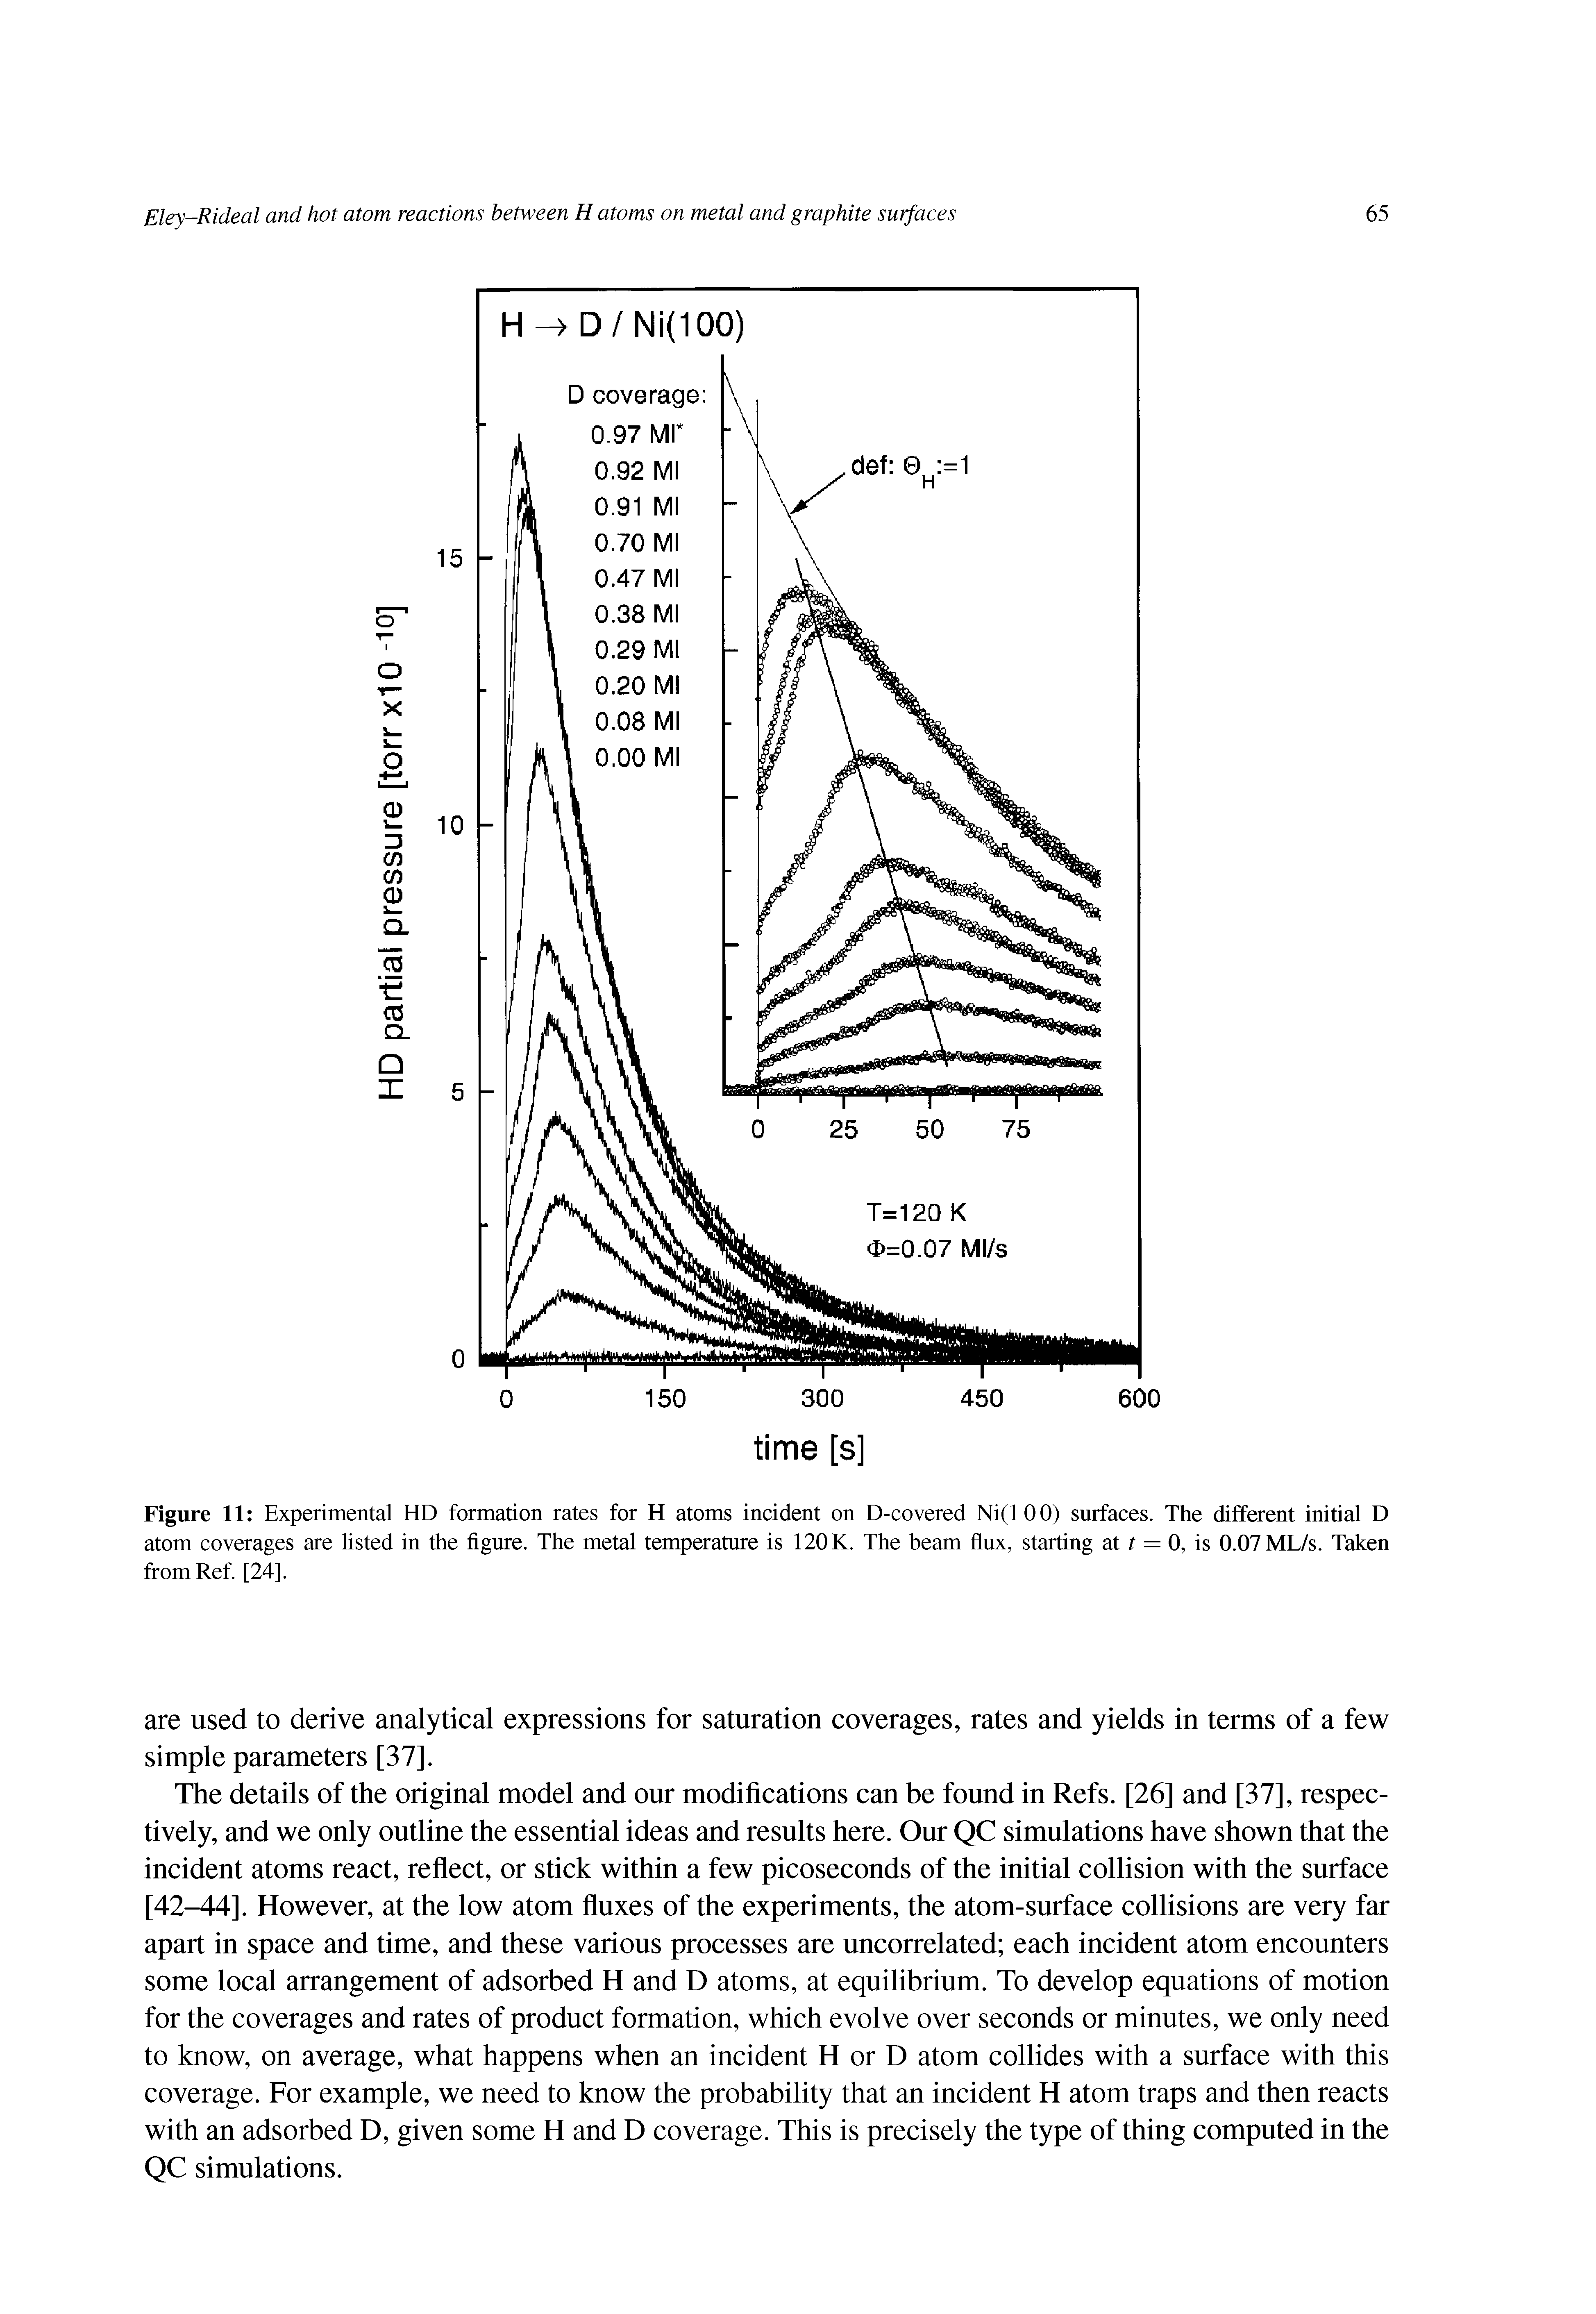 Figure 11 Experimental HD formation rates for H atoms incident on D-covered Ni(100) surfaces. The different initial D atom coverages are listed in the figure. The metal temperature is 120K. The beam flux, starting at t = 0, is 0.07 ML/s. Taken from Ref. [24].